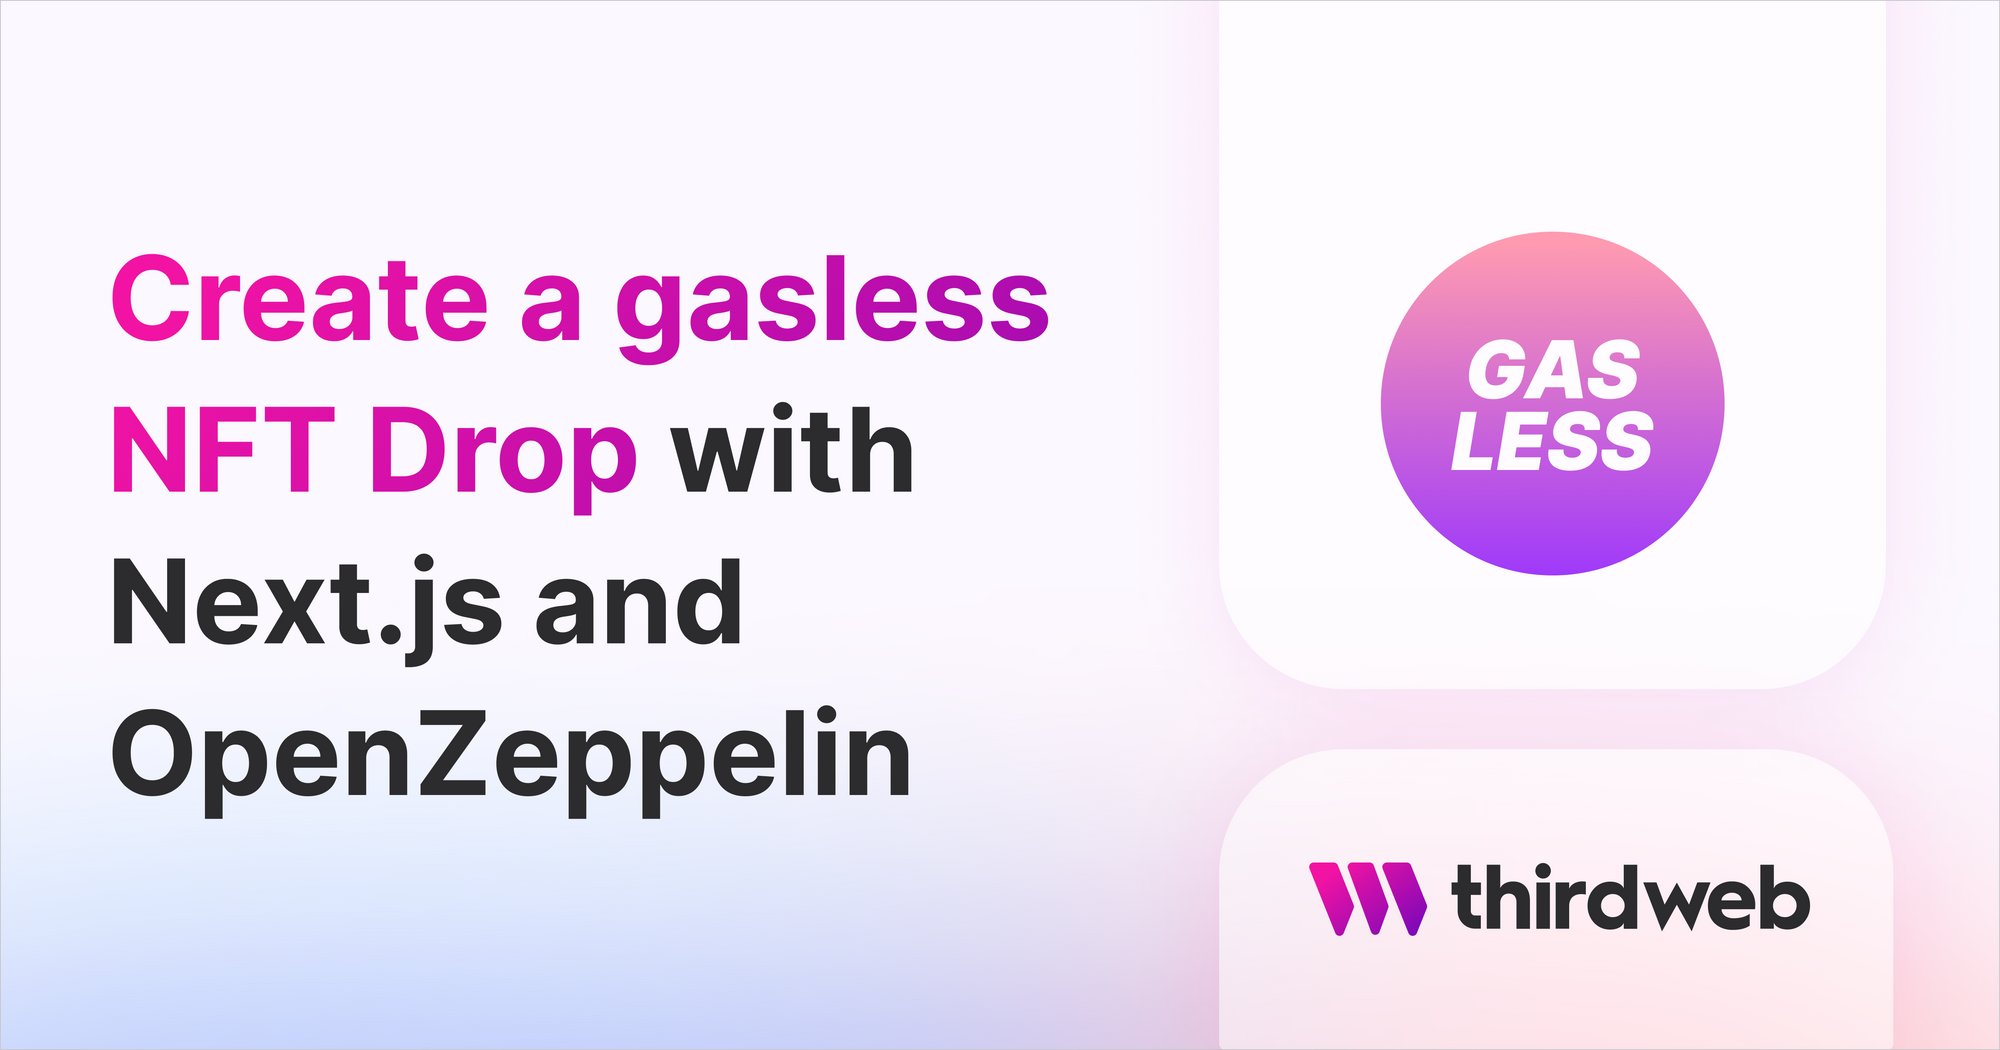 Create a gasless NFT drop with Next.js and OpenZeppelin